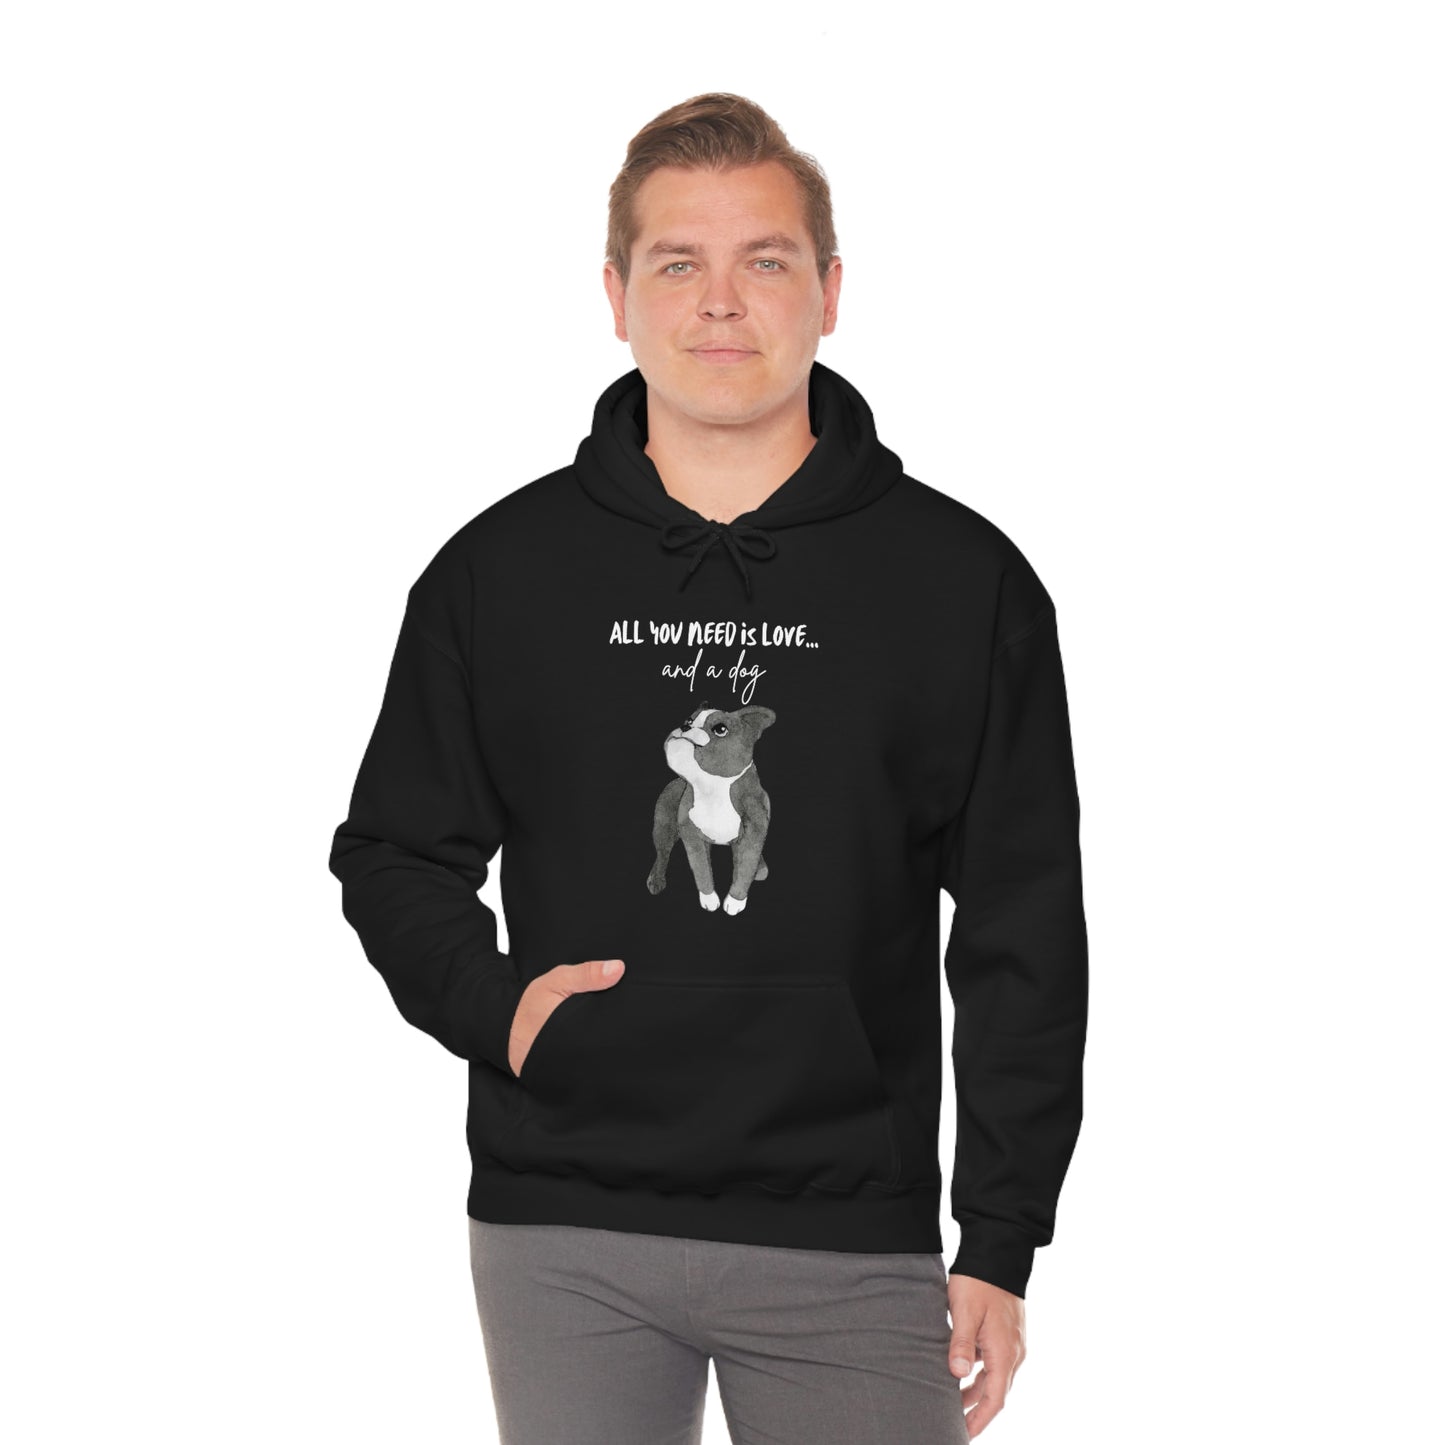 All You Need Is Love And A Dog Unisex Heavy Blend™ Hooded Sweatshirt | Happy Dog Range of Black Dog Tees